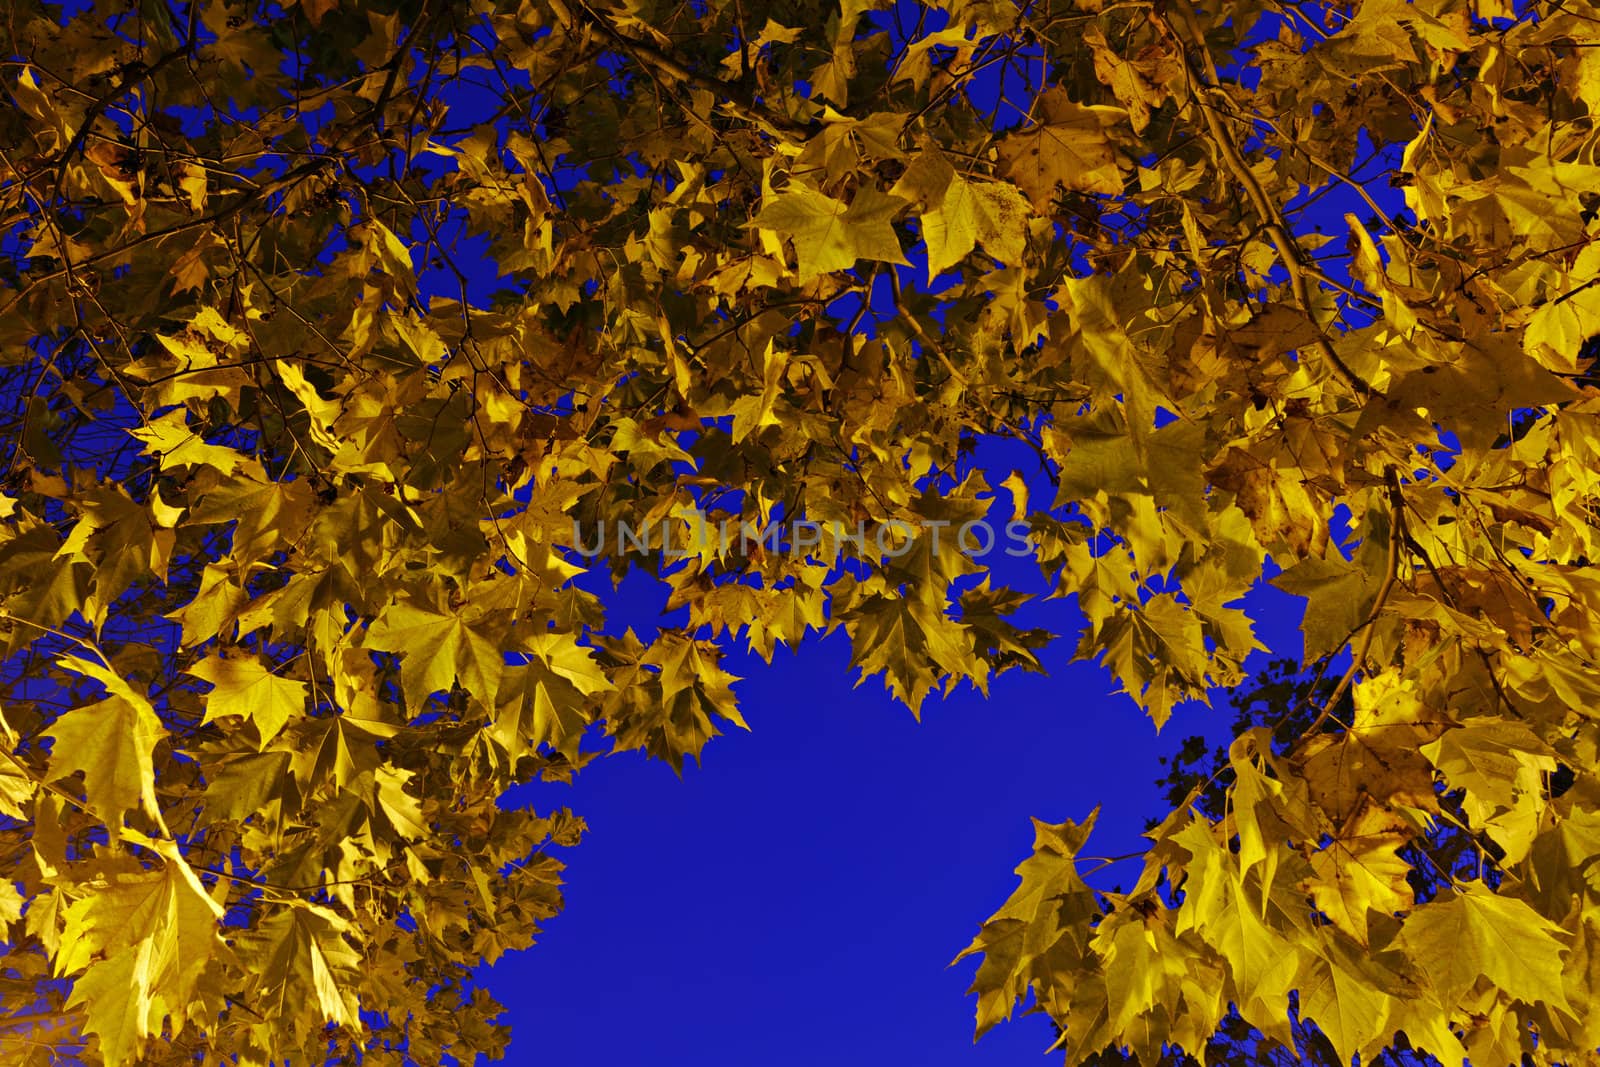 Fall yellow maple leaves in the blue sky